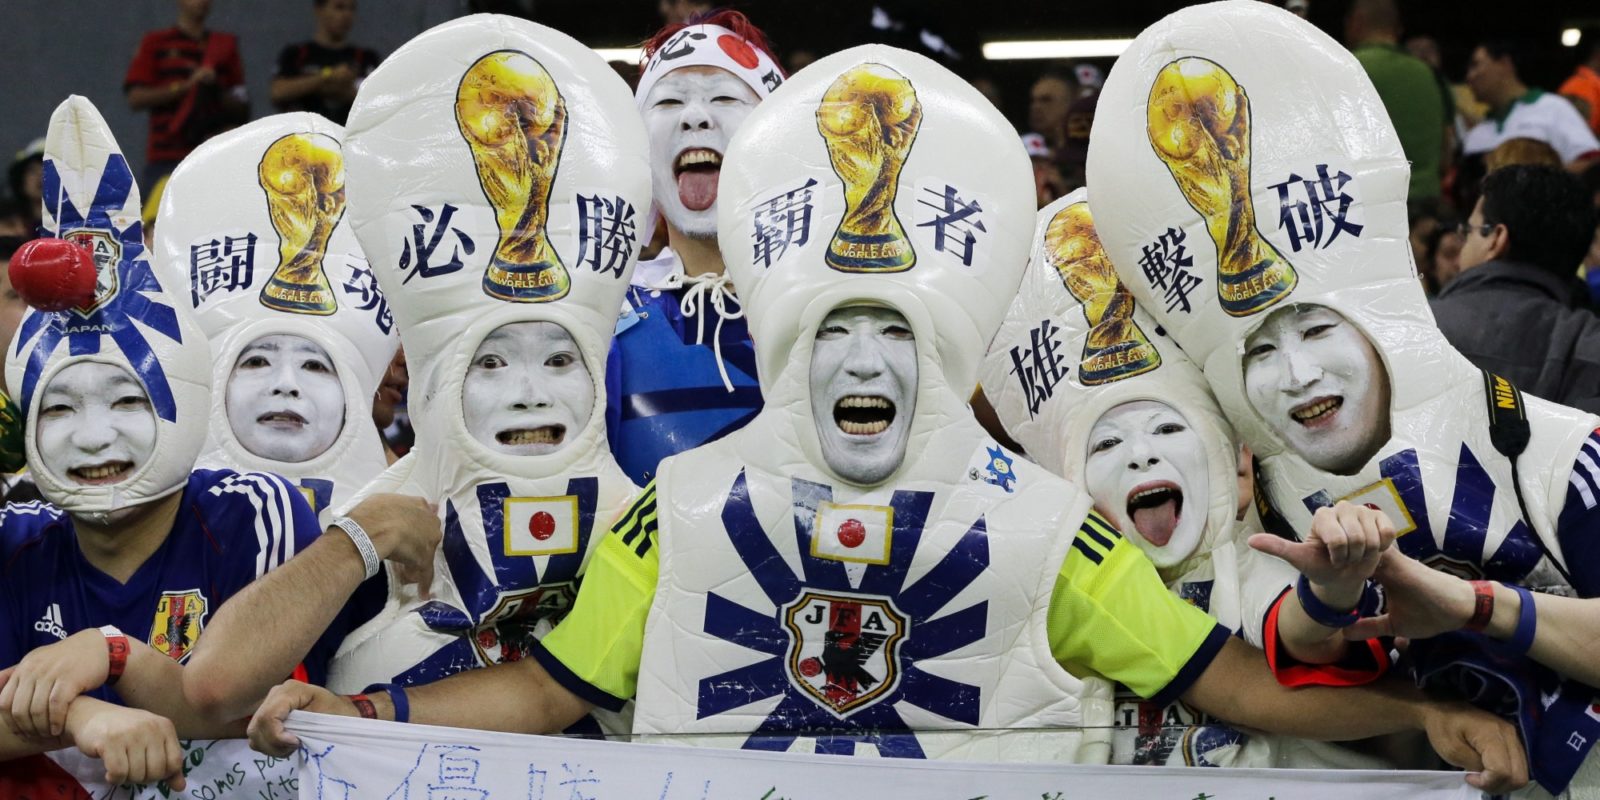 Japanese supporters react before the start of  the group C World Cup soccer match between Ivory Coast and Japan at the Arena Pernambuco in Recife, Brazil, Saturday, June 14, 2014.    (AP Photo/Shuji Kajiyama)